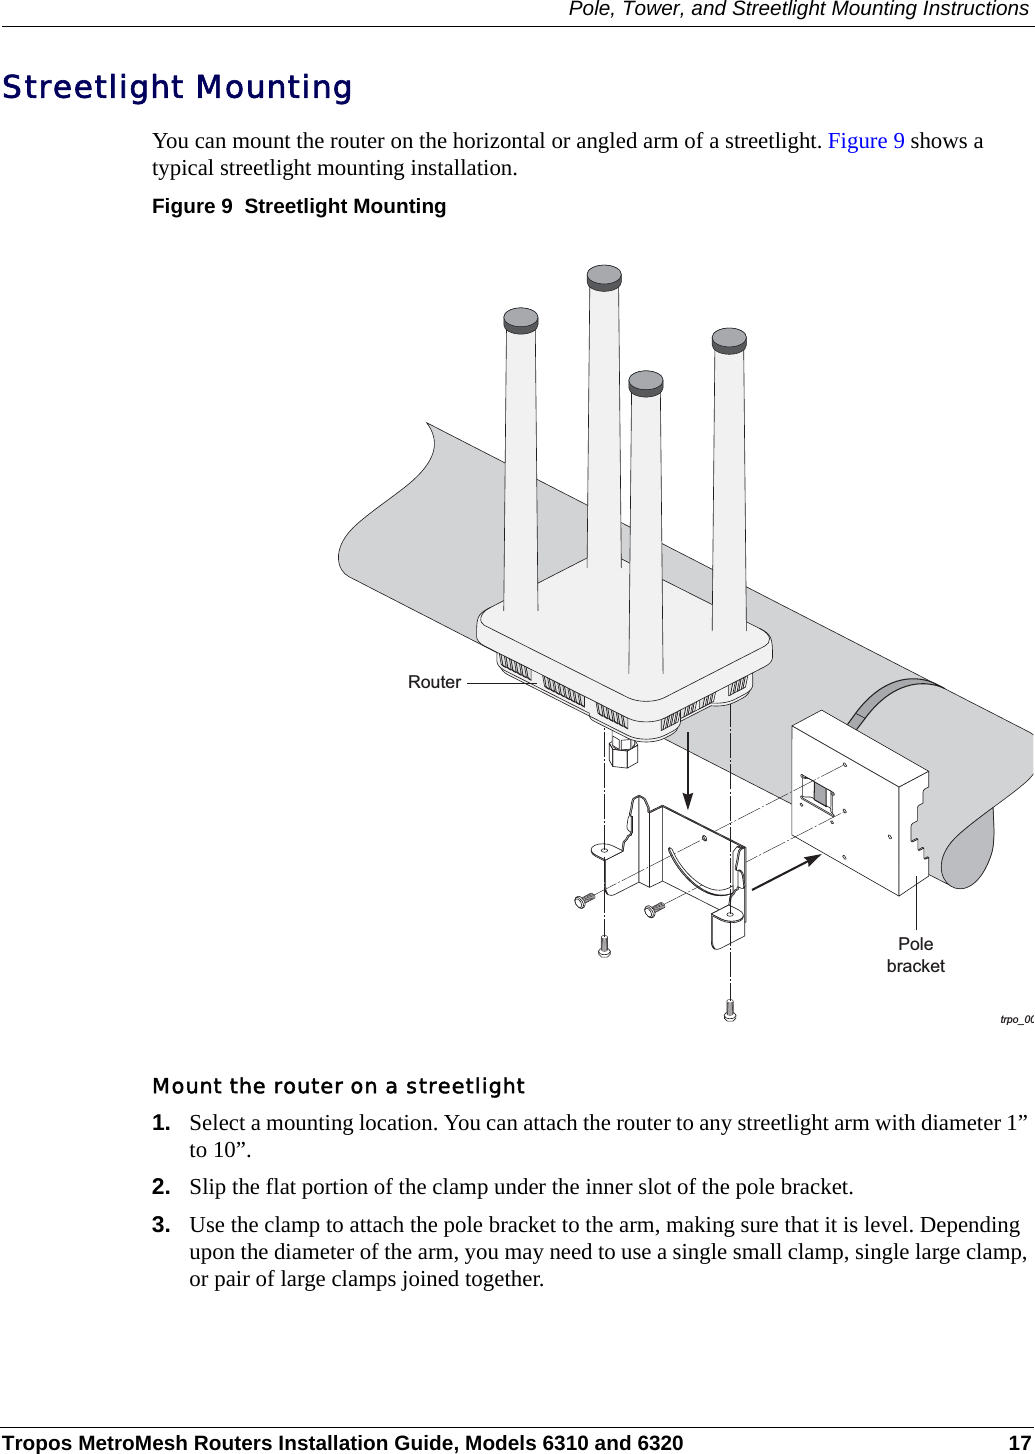 Pole, Tower, and Streetlight Mounting InstructionsTropos MetroMesh Routers Installation Guide, Models 6310 and 6320 17Streetlight MountingYou can mount the router on the horizontal or angled arm of a streetlight. Figure 9 shows a typical streetlight mounting installation.Figure 9  Streetlight MountingMount the router on a streetlight1. Select a mounting location. You can attach the router to any streetlight arm with diameter 1” to 10”. 2. Slip the flat portion of the clamp under the inner slot of the pole bracket. 3. Use the clamp to attach the pole bracket to the arm, making sure that it is level. Depending upon the diameter of the arm, you may need to use a single small clamp, single large clamp, or pair of large clamps joined together. trpo_00PolebracketRouter